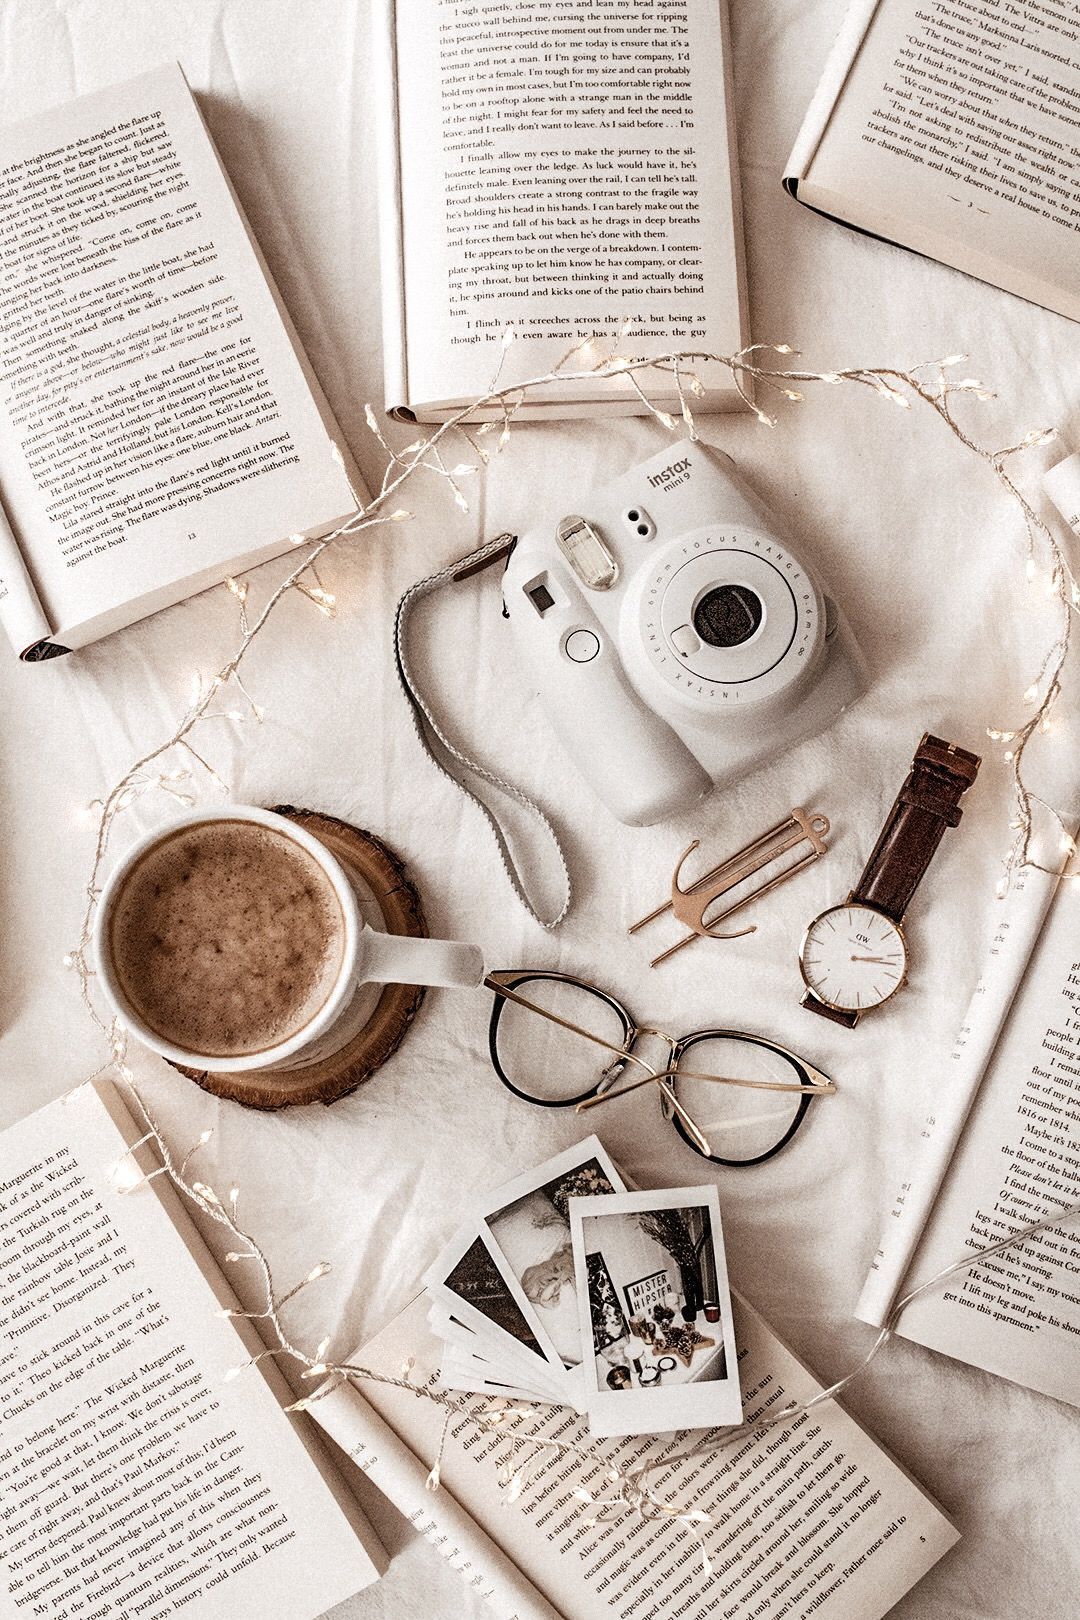 A cup of coffee and some books on the bed - Books, minimalist beige, coffee